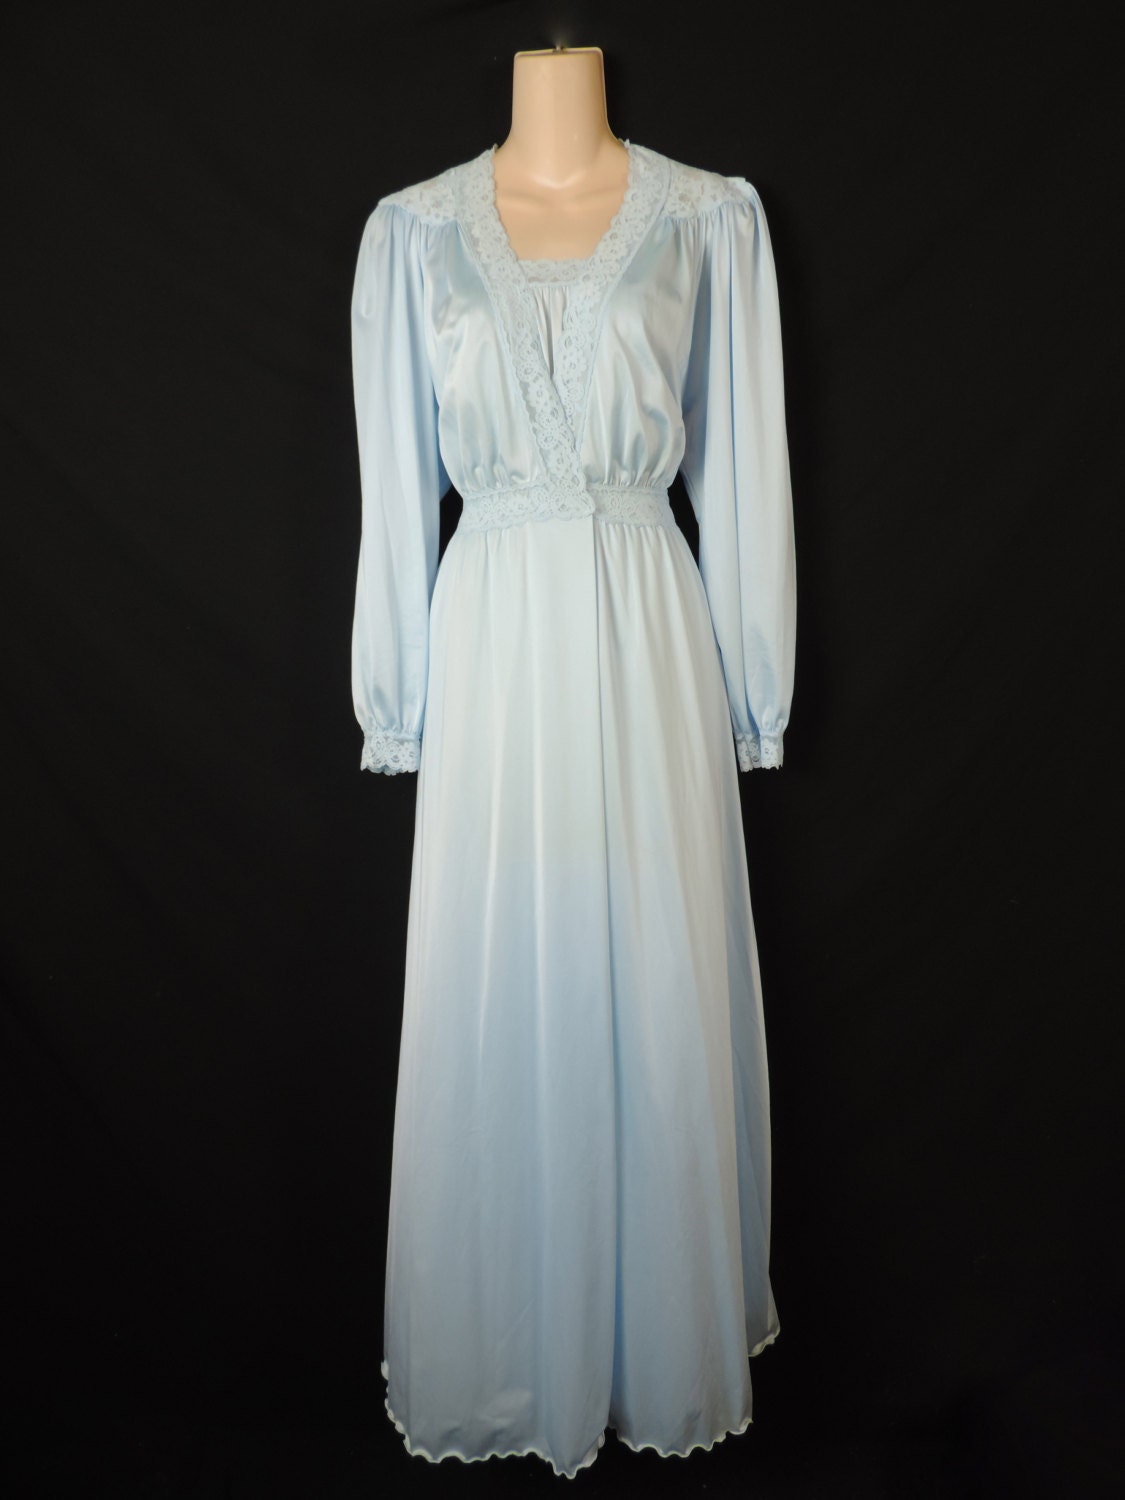 blue lace peignoir set. princess nightgown and robe.